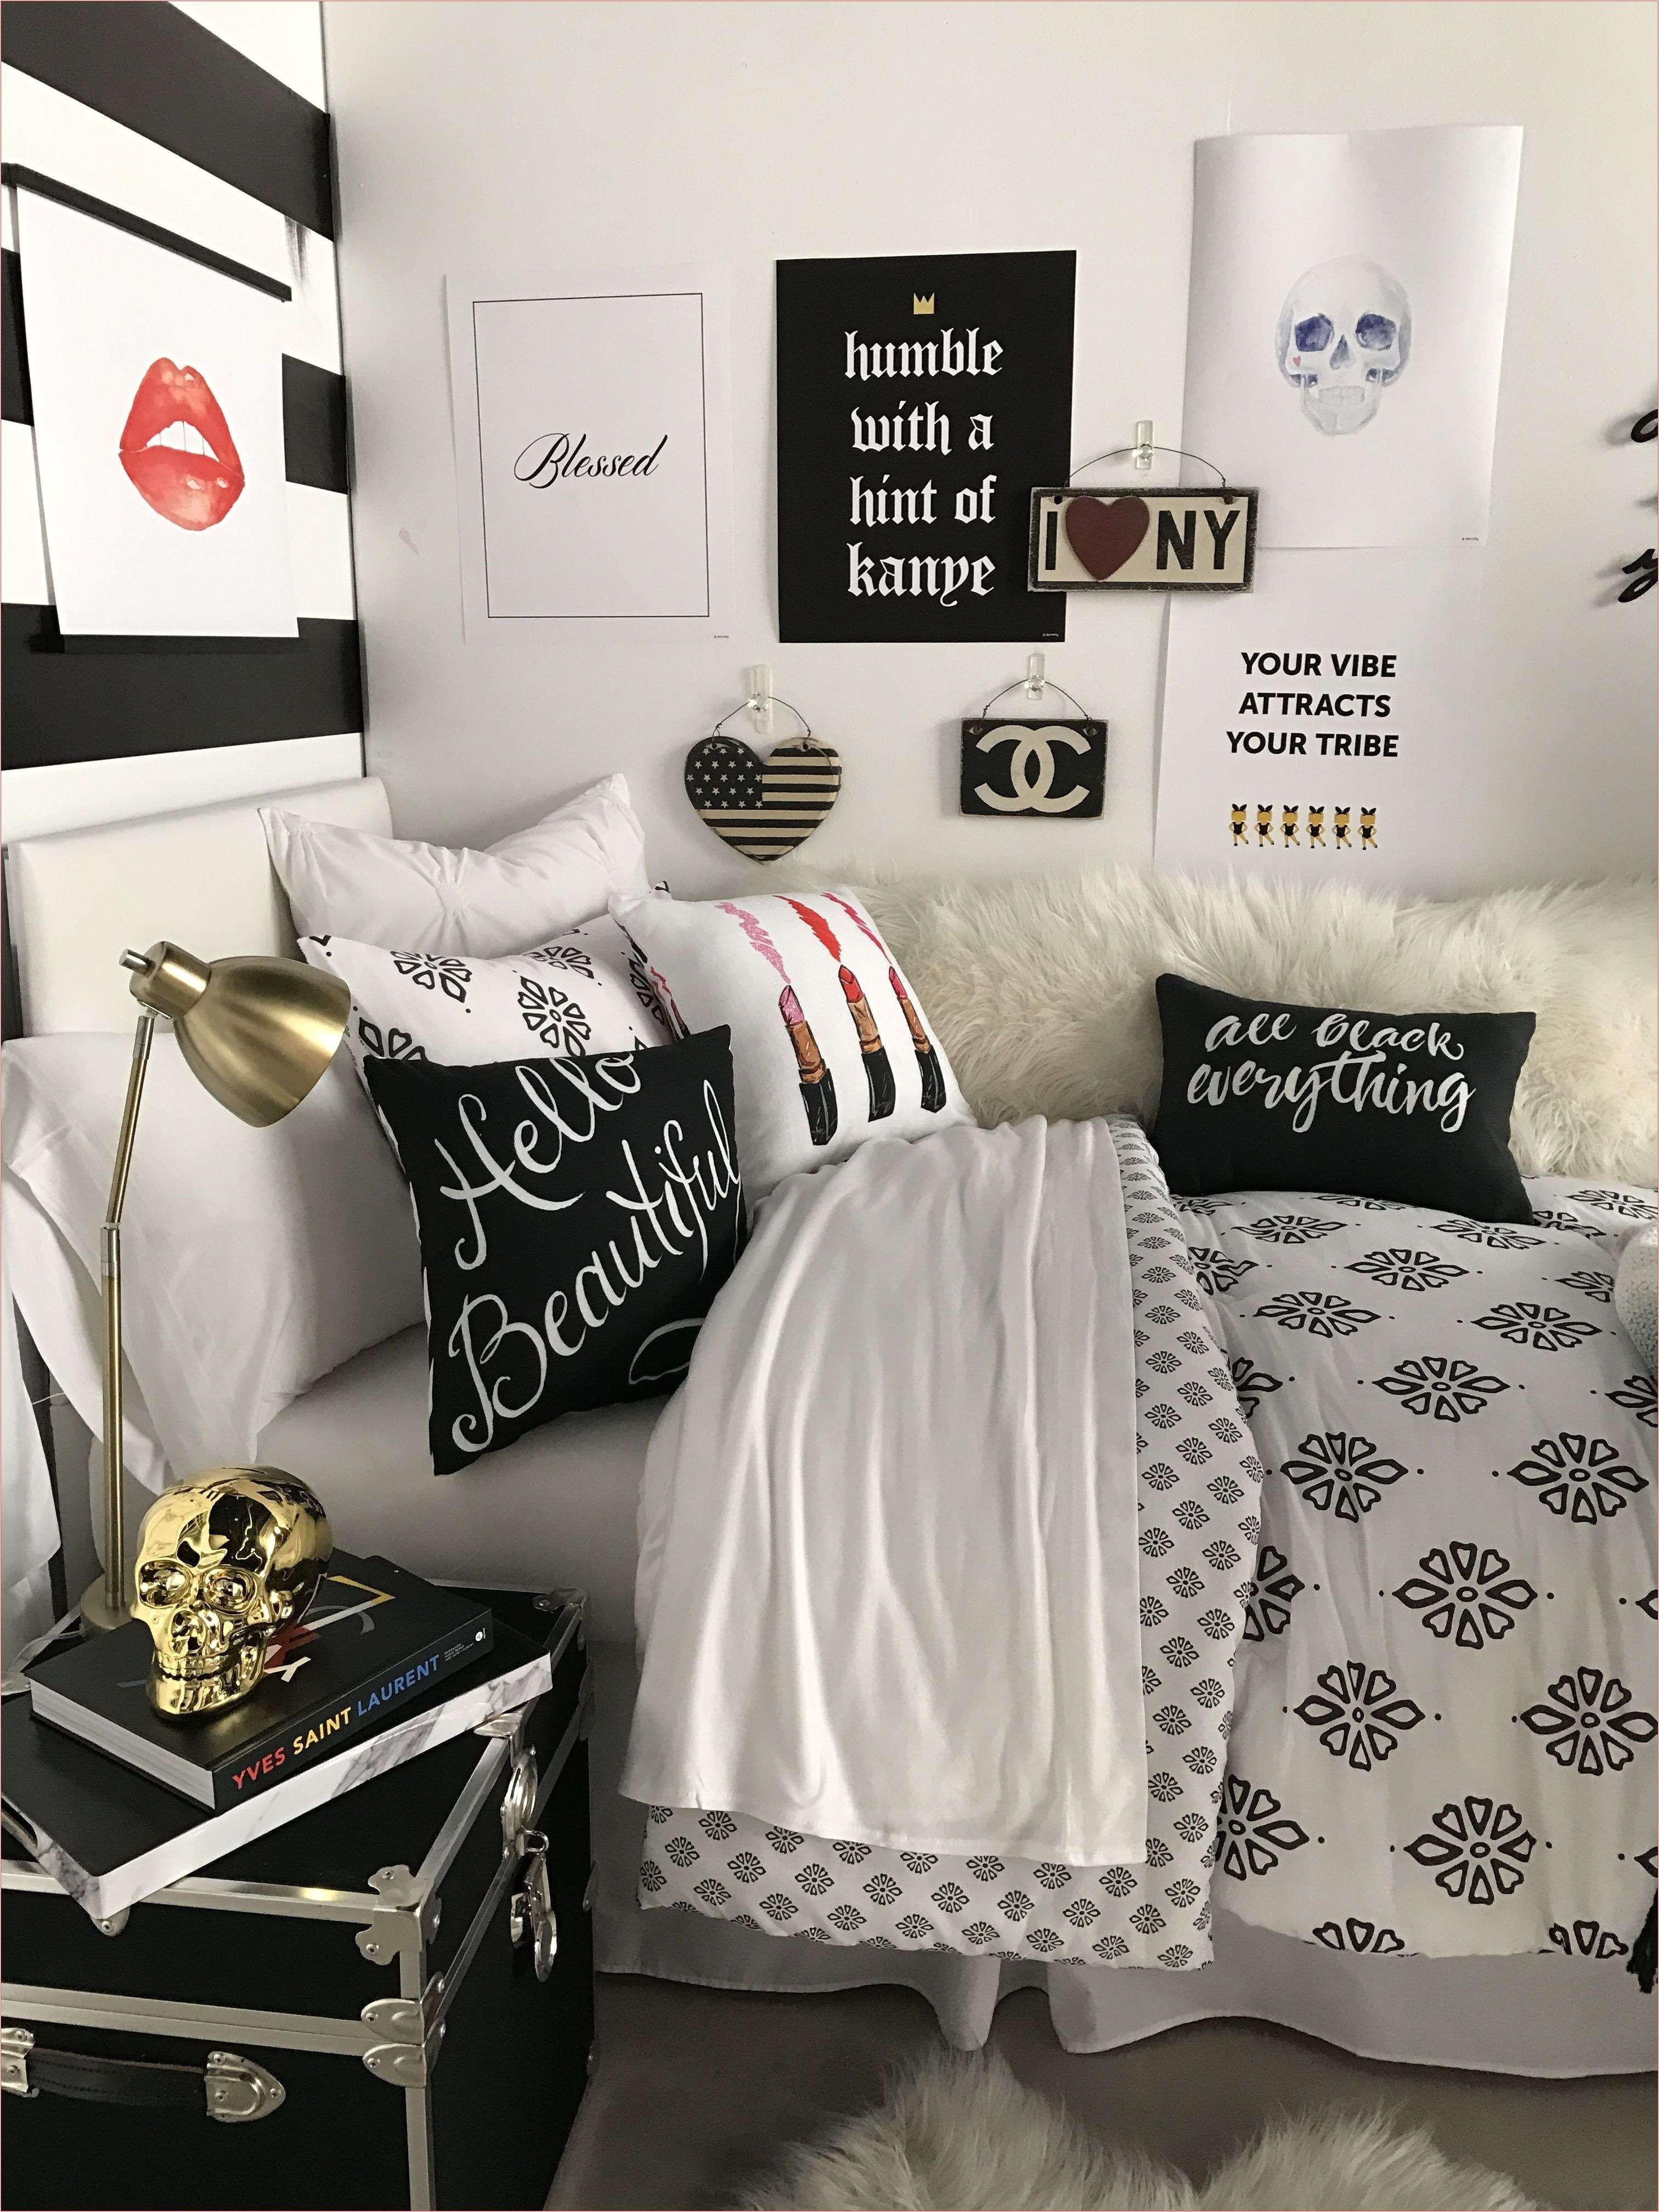 Black and White Bedroom Fresh Bedroom Styles Beautiful Media Cache Ec0 Pinimg 1200x 03 01 0d